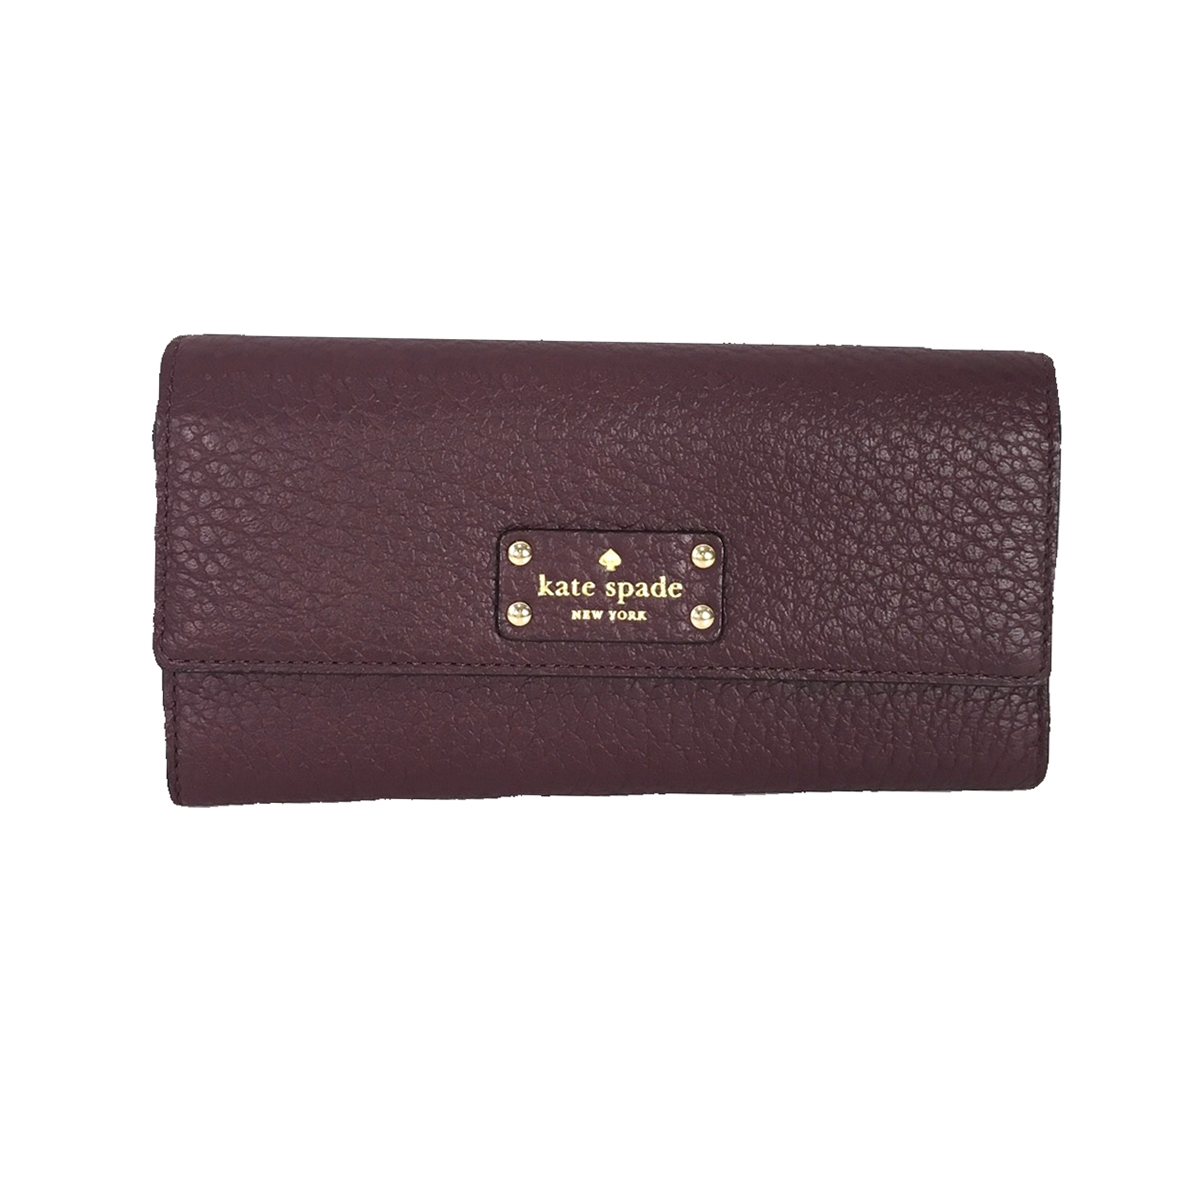 St.Thomas Leather Wallet Clutch with Coin Purse Unused - Ruby Lane